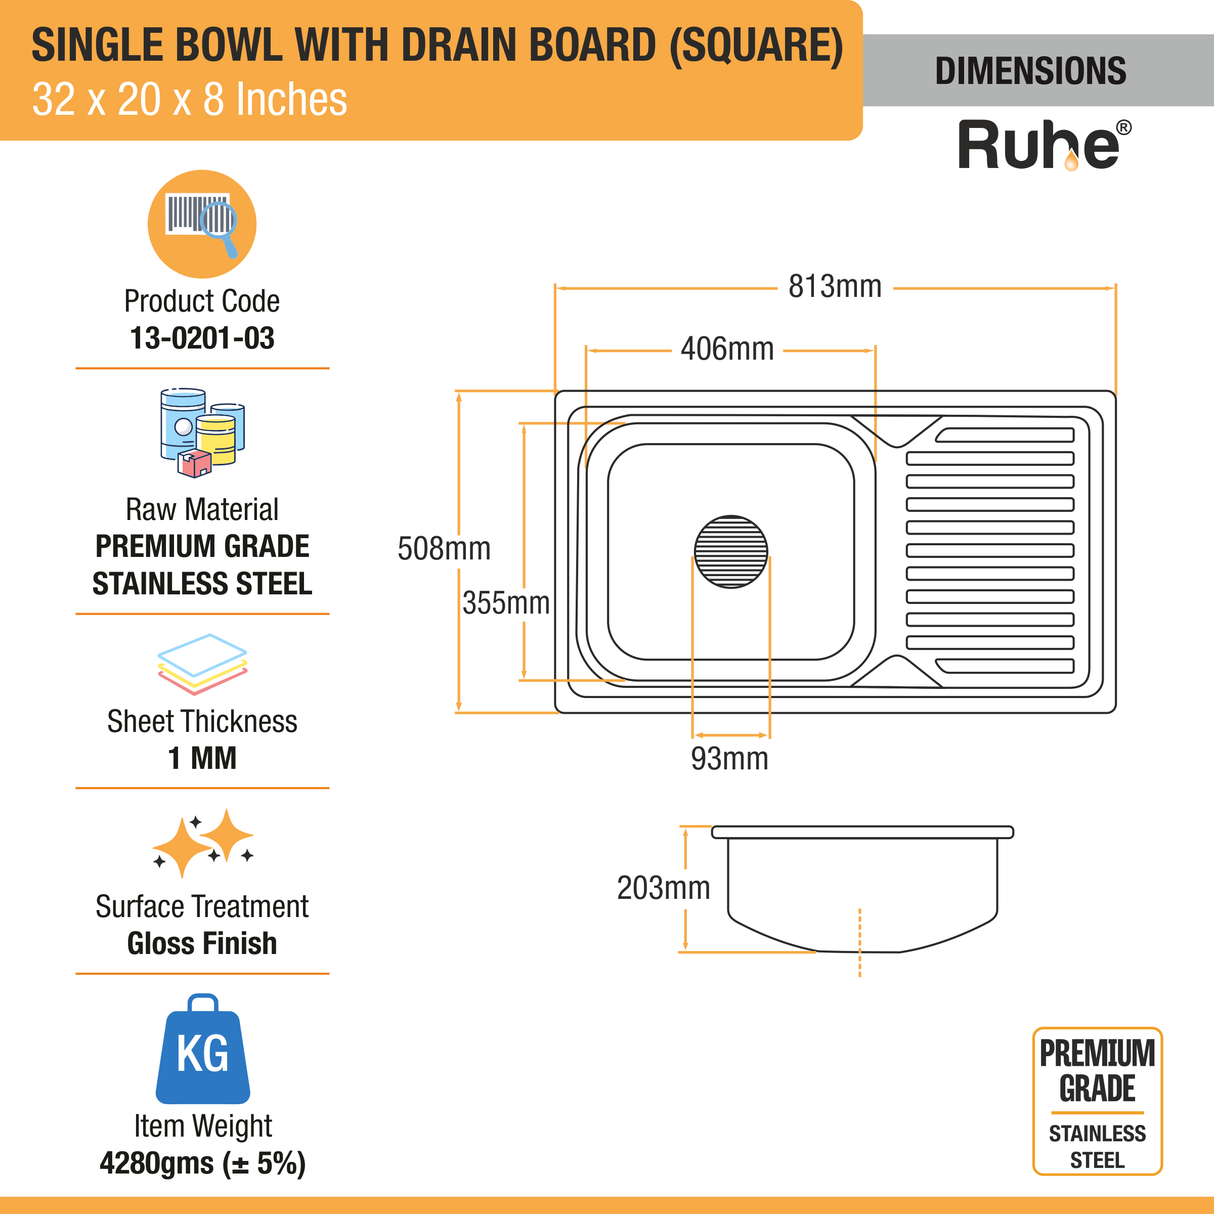 Square Single Bowl (32 x 20 x 8 inches) Kitchen Sink with Drainboard dimensions and size